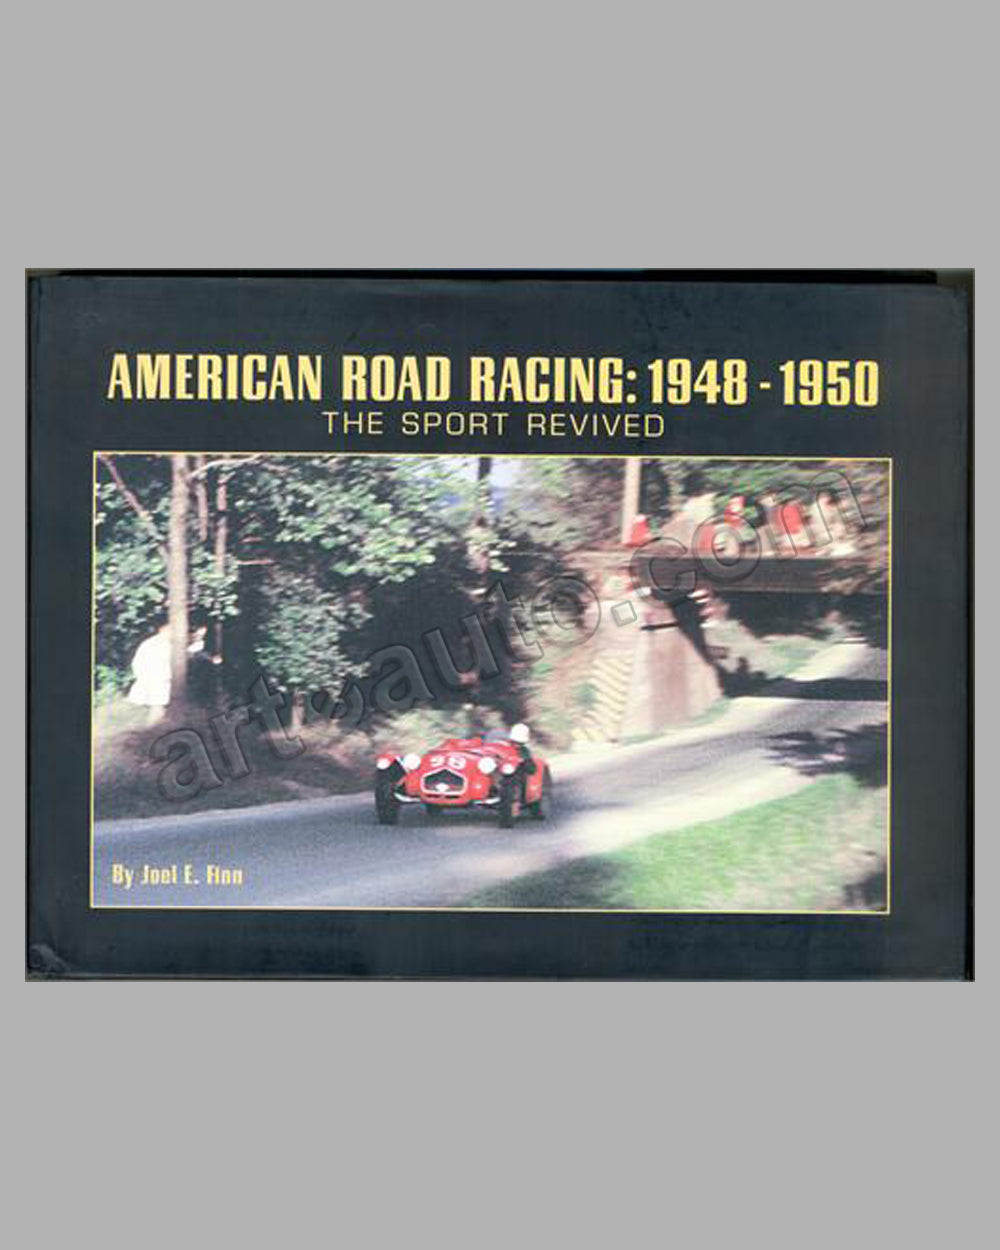 American Road Racing: 1948-1950, The Sport Revived book by J. Finn,1st ed.